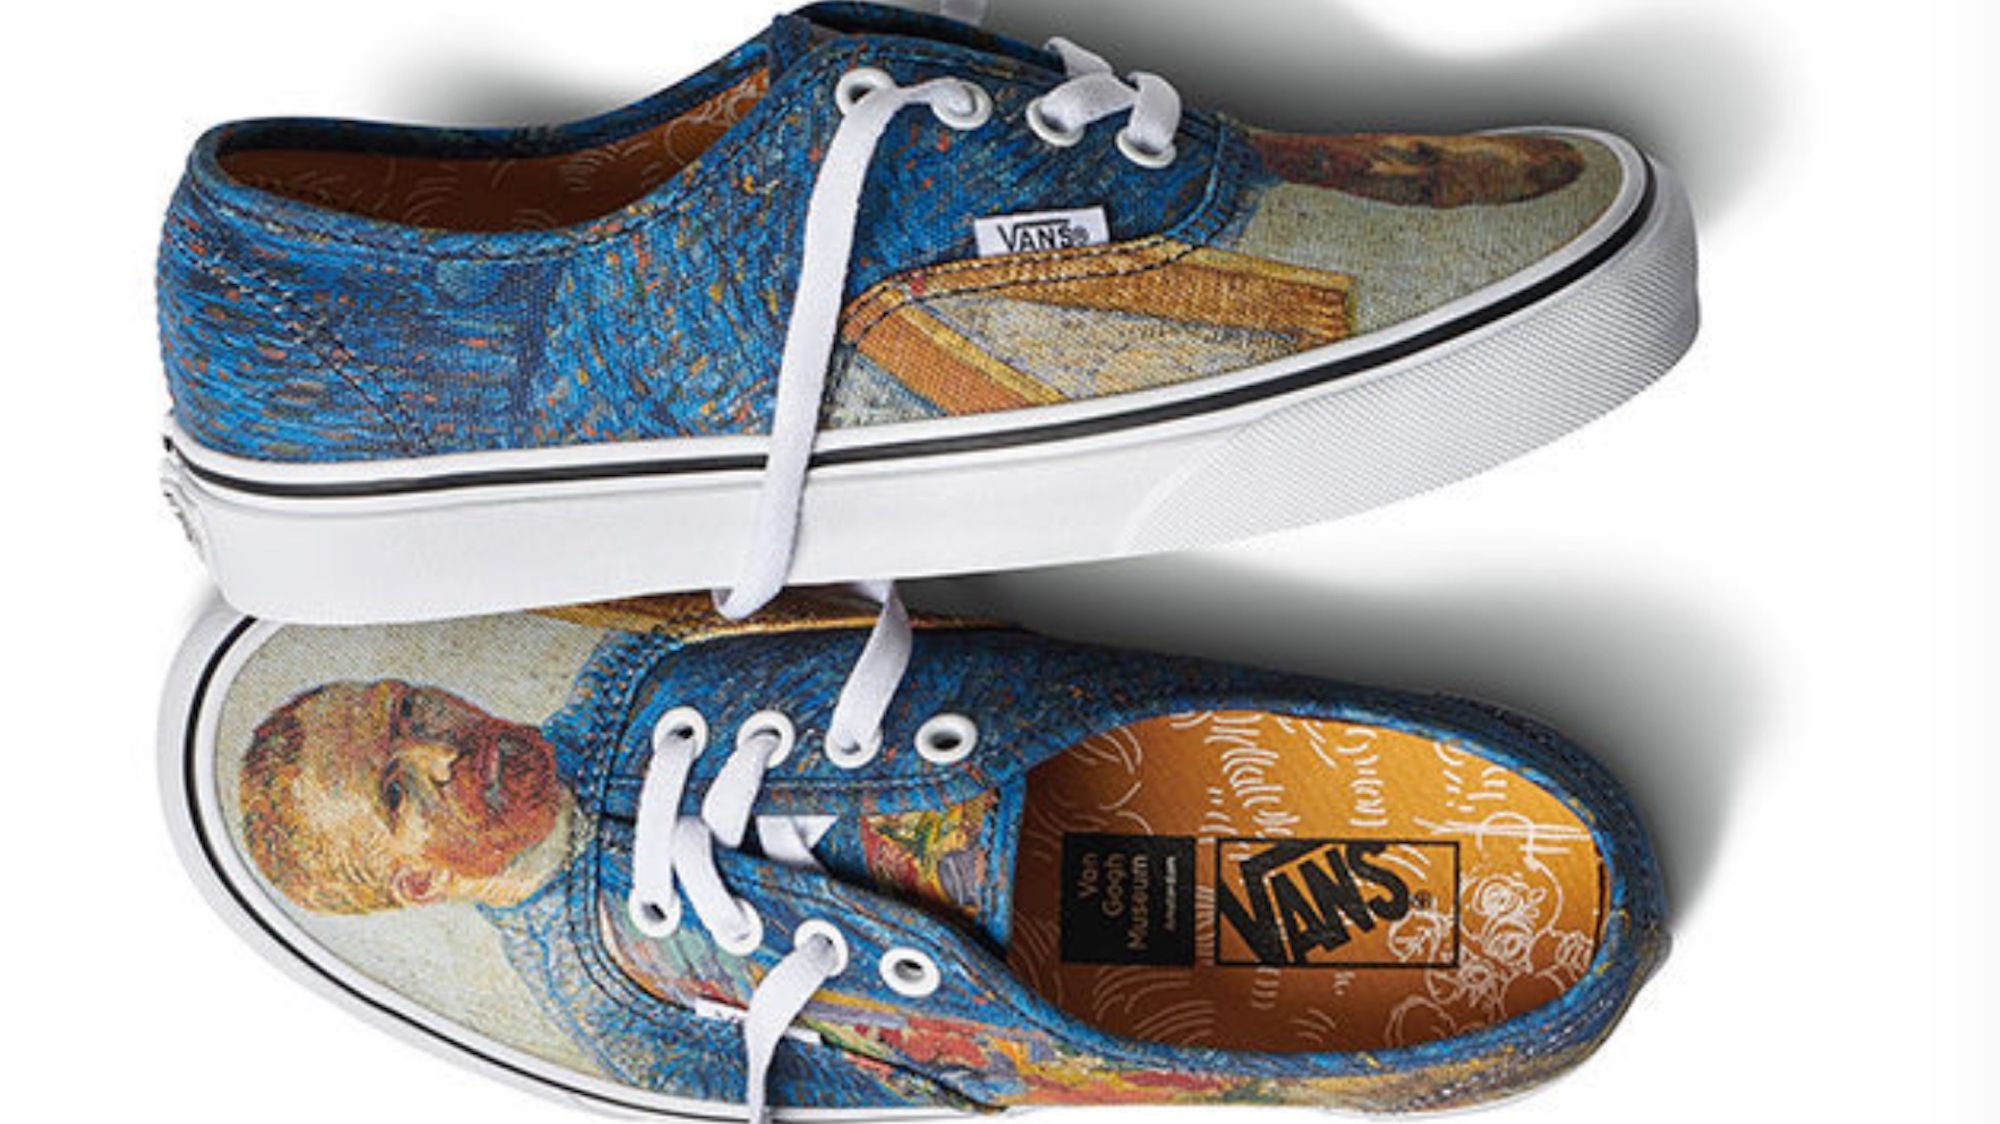 Vans and the Van Gogh Museum Want to Turn Your Sneakers Into Works of Art |  Mental Floss